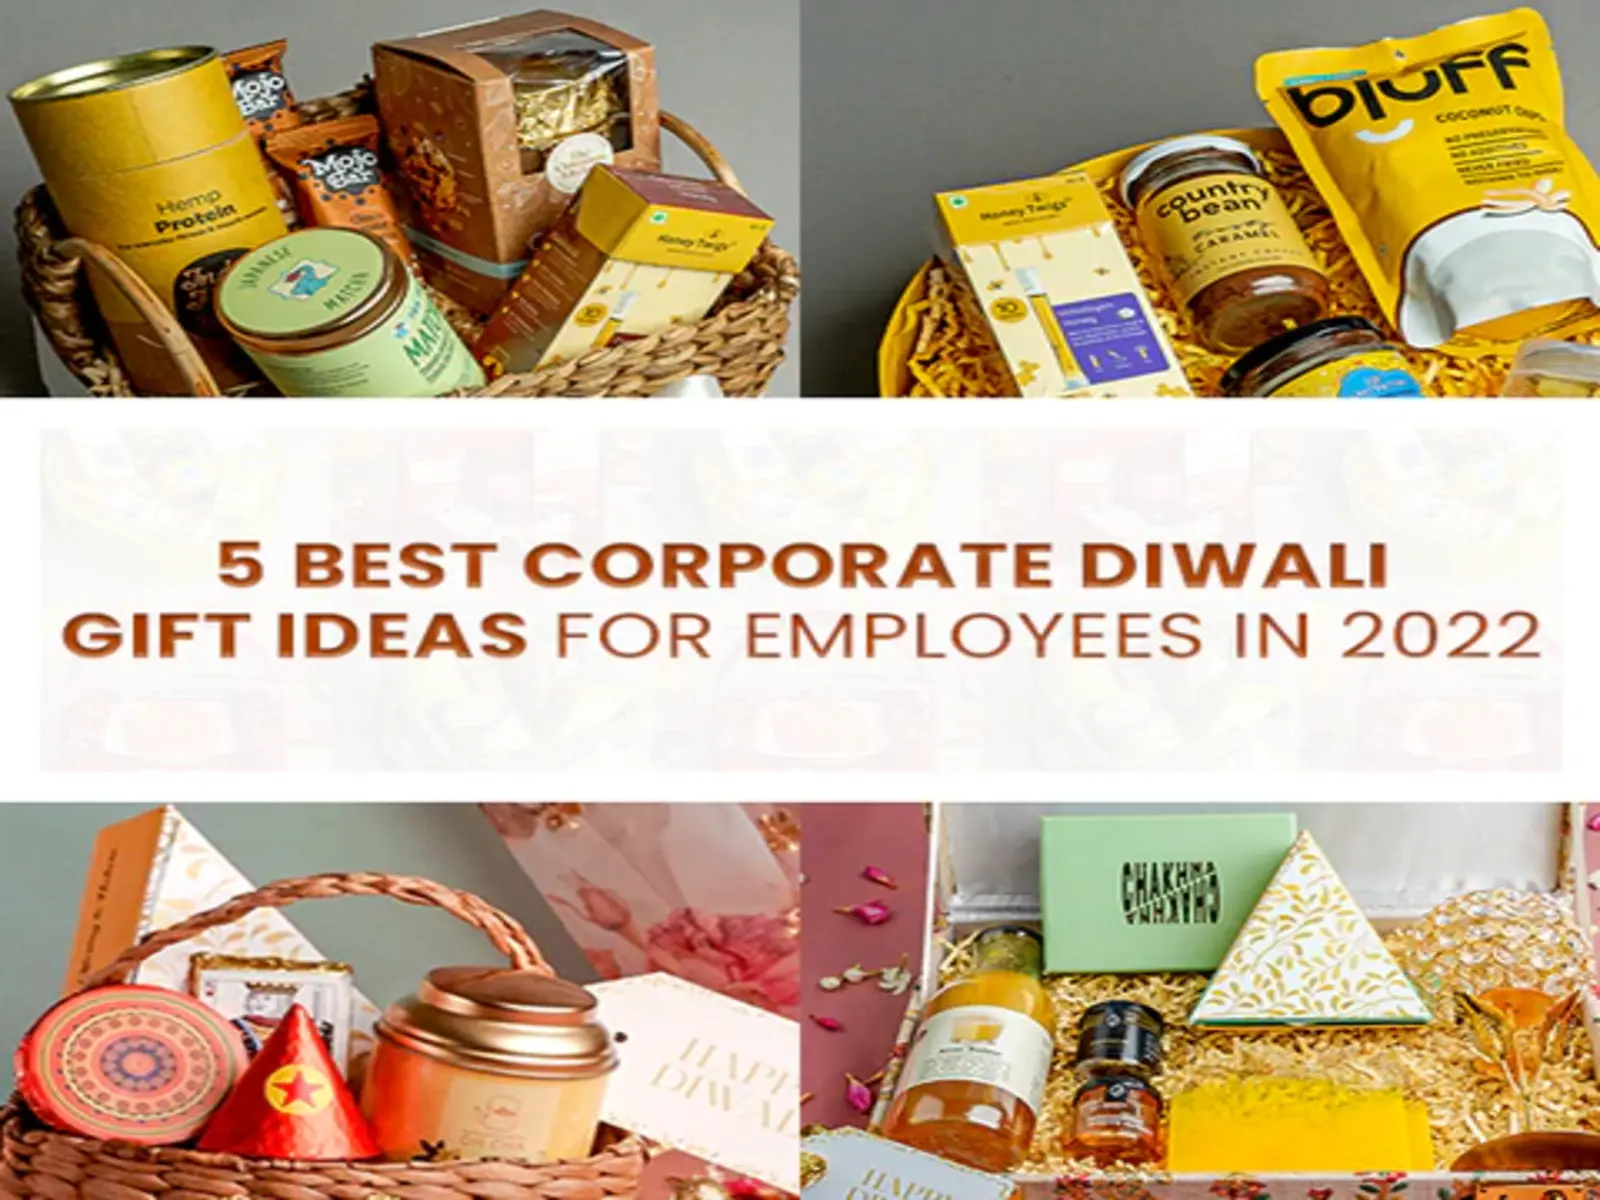 Diwali Gifts For Employees: Best Diwali Gift Ideas for Employees